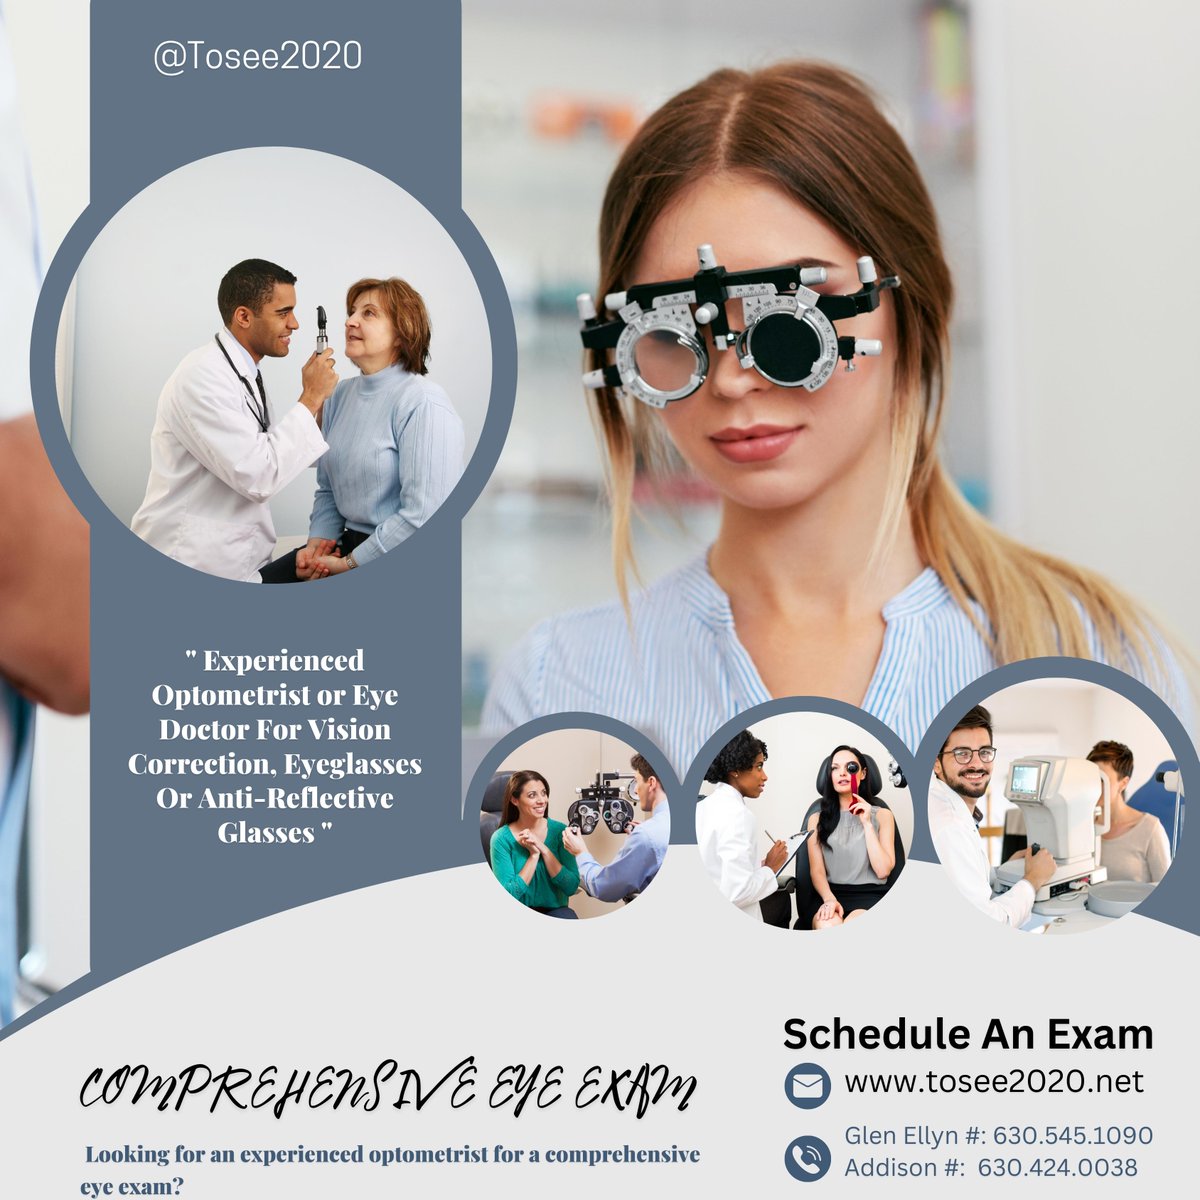 👁️ Looking for an experienced optometrist for a comprehensive eye exam?
From routine exams to specialized treatments, we've got you covered. #EyeCare #Optometry #HealthyEyes

Read More at : tosee2020.net/services/compr…